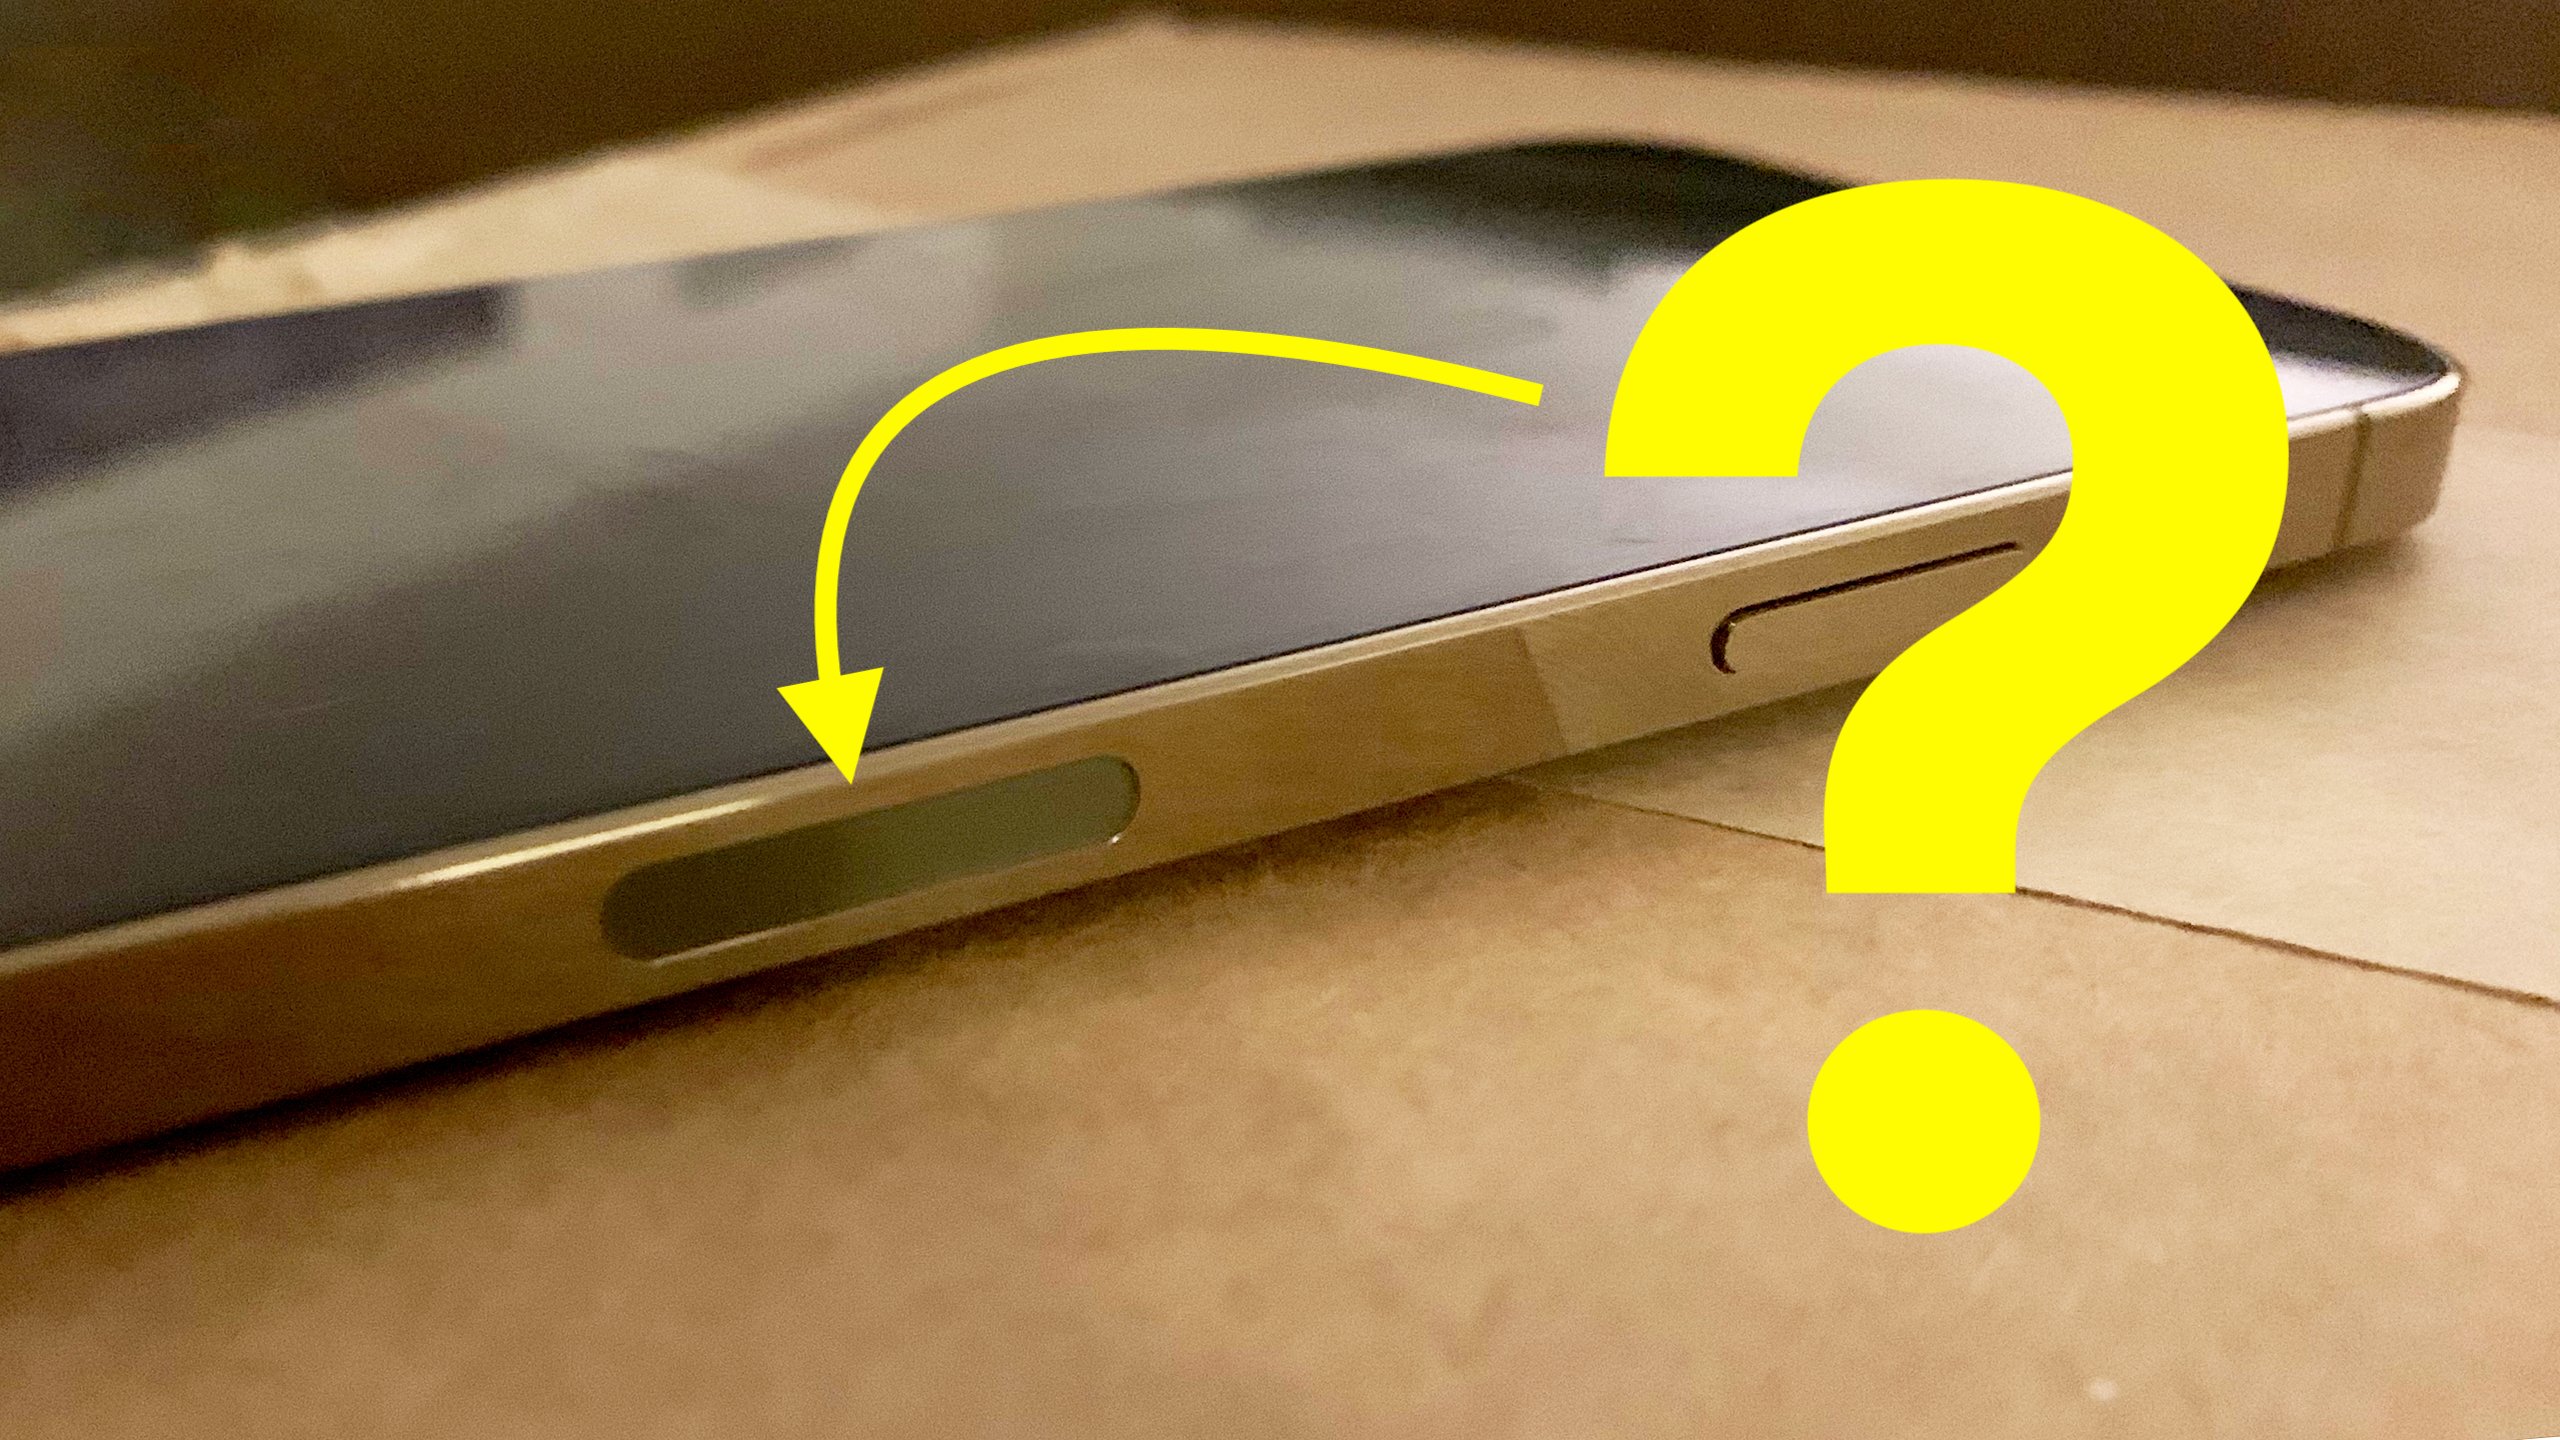 Why The Iphone 12 Has A Black Oval Indentation On The Side Payette Forward